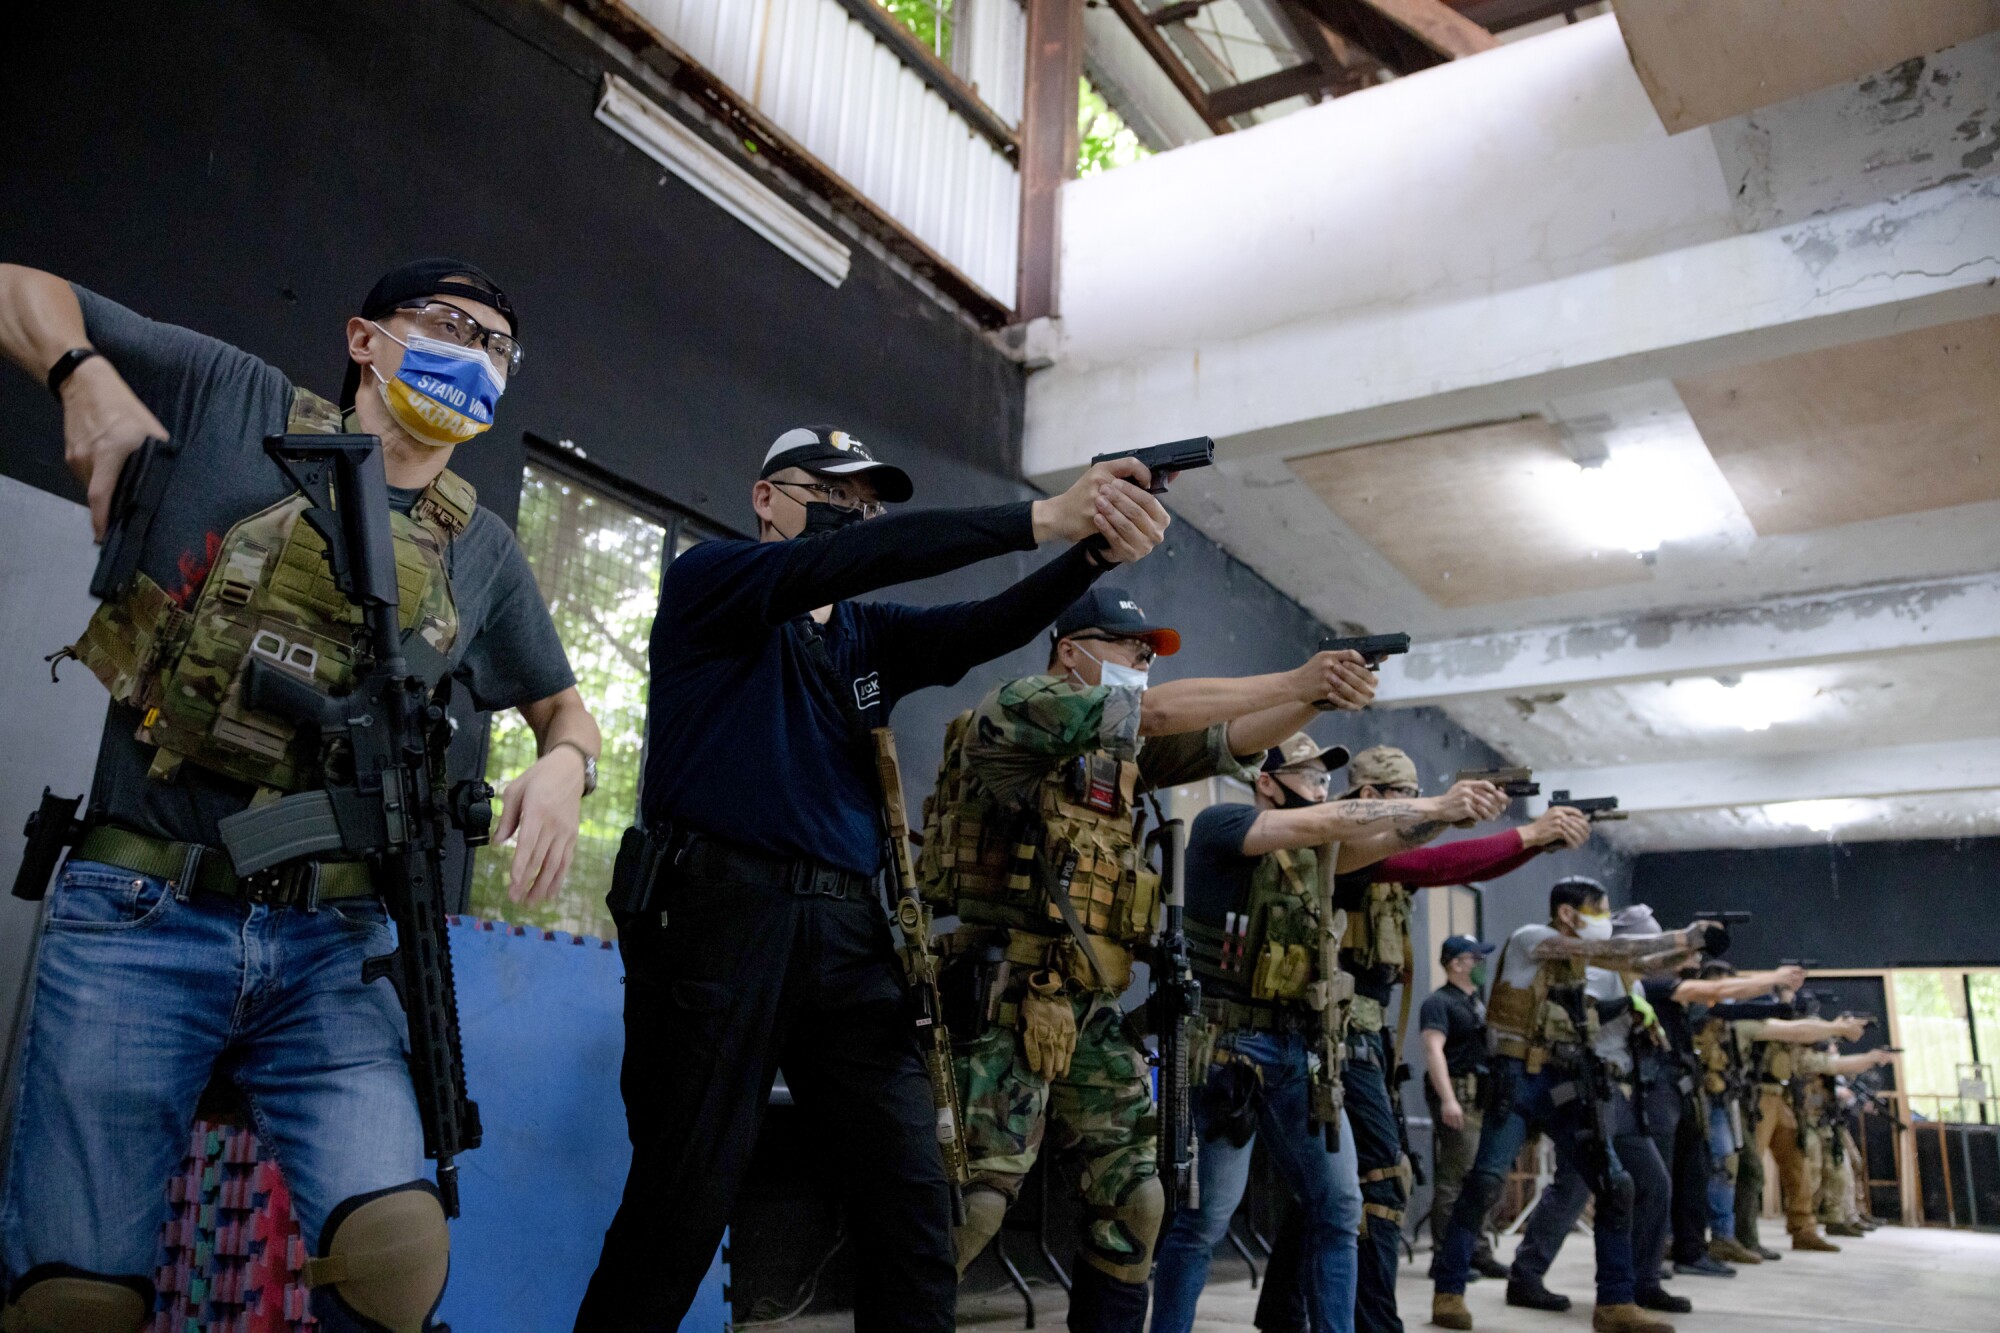 A line of people, with most of them holding and aiming handguns.